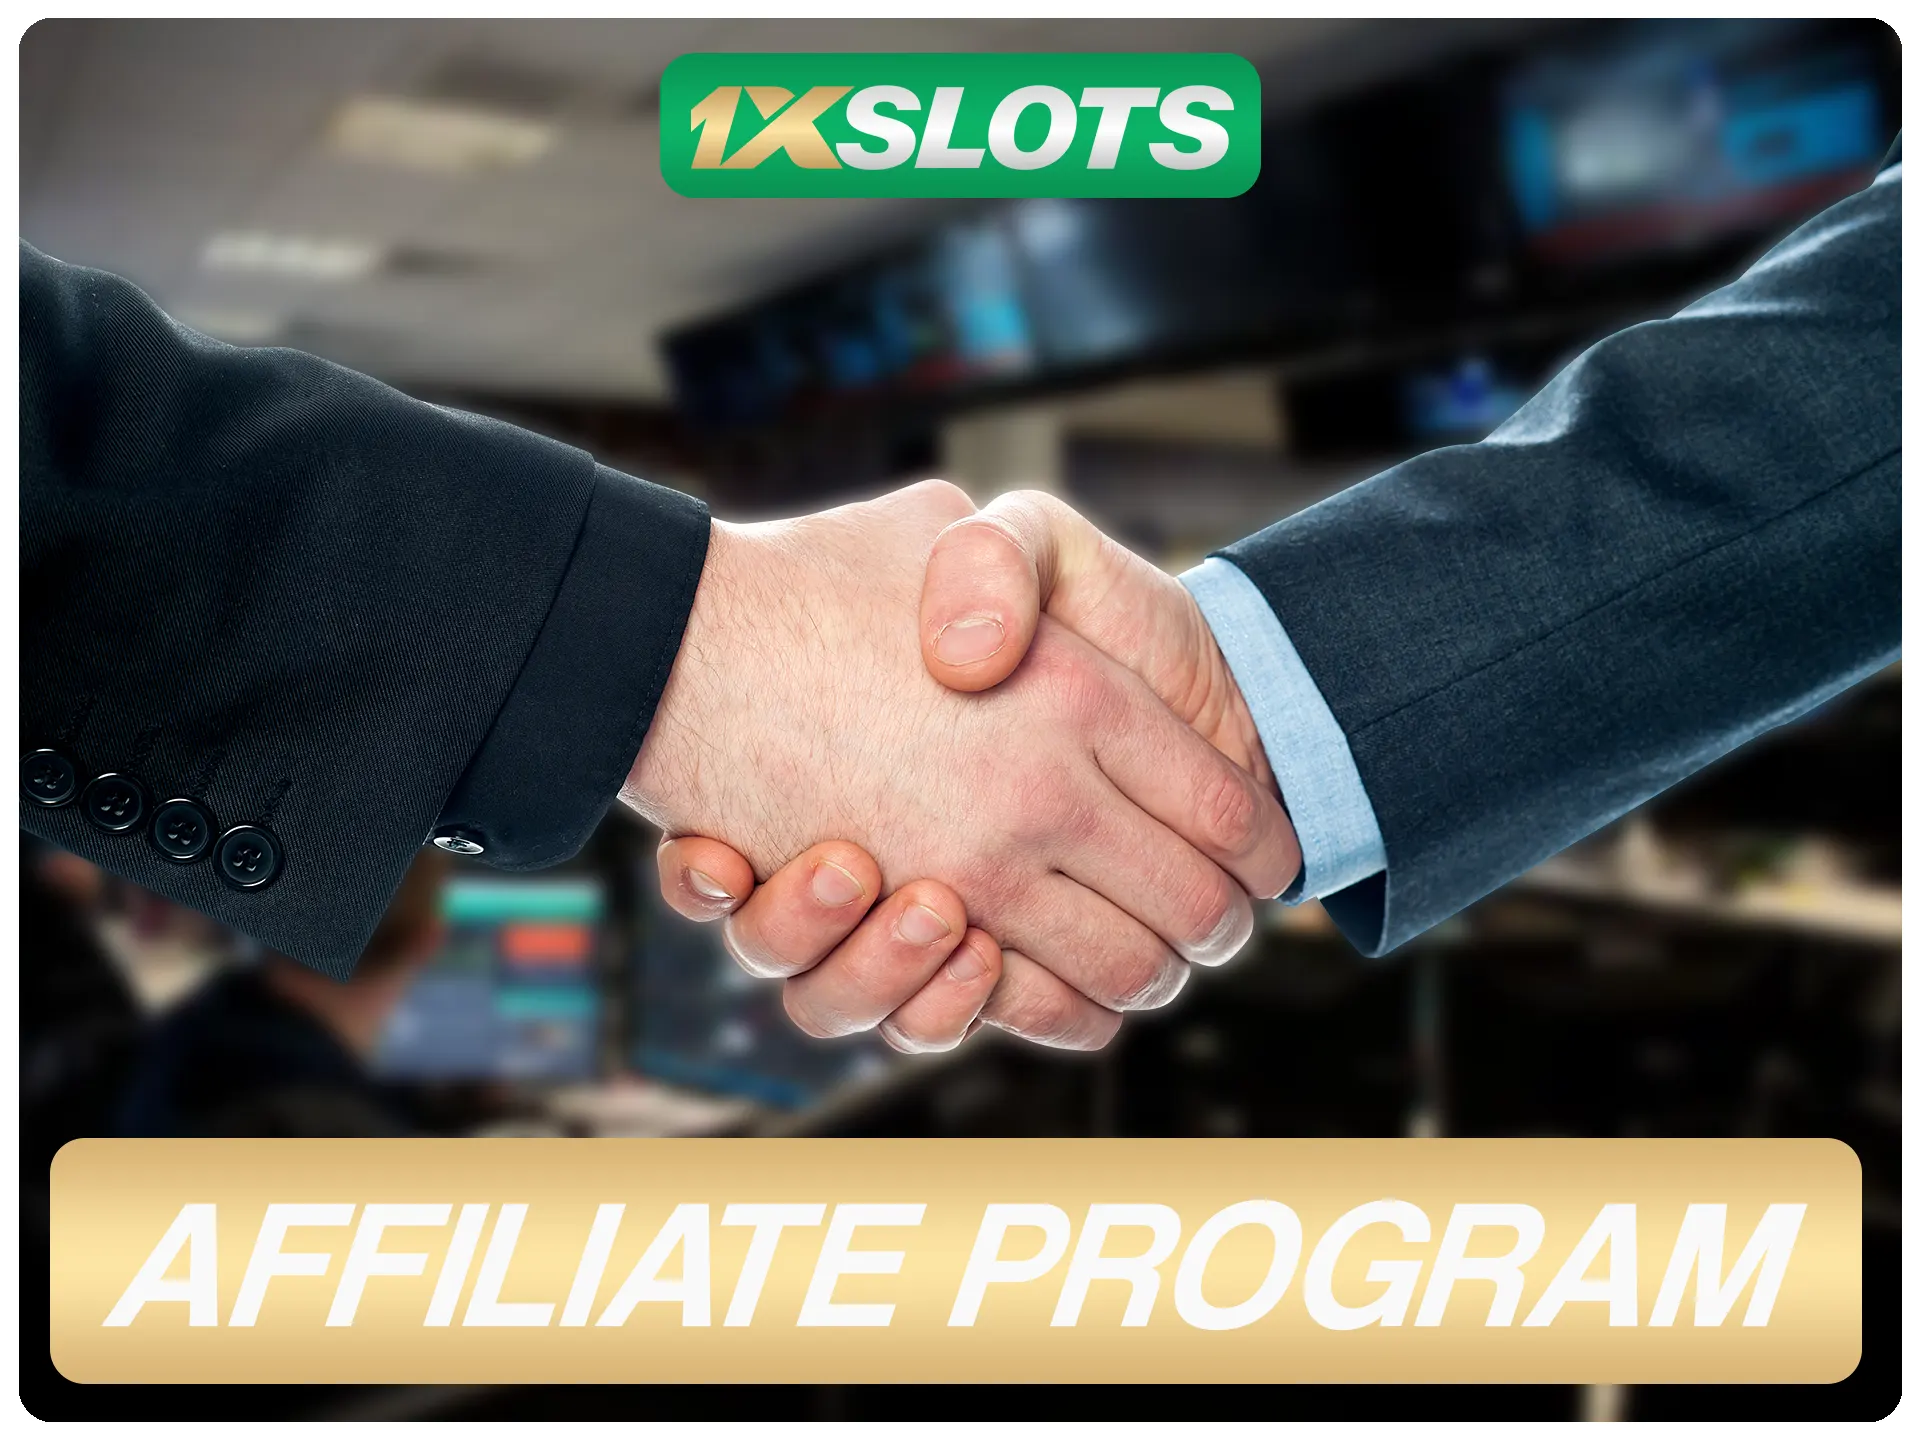 Invite your friens to 1xSlots and get additional money.